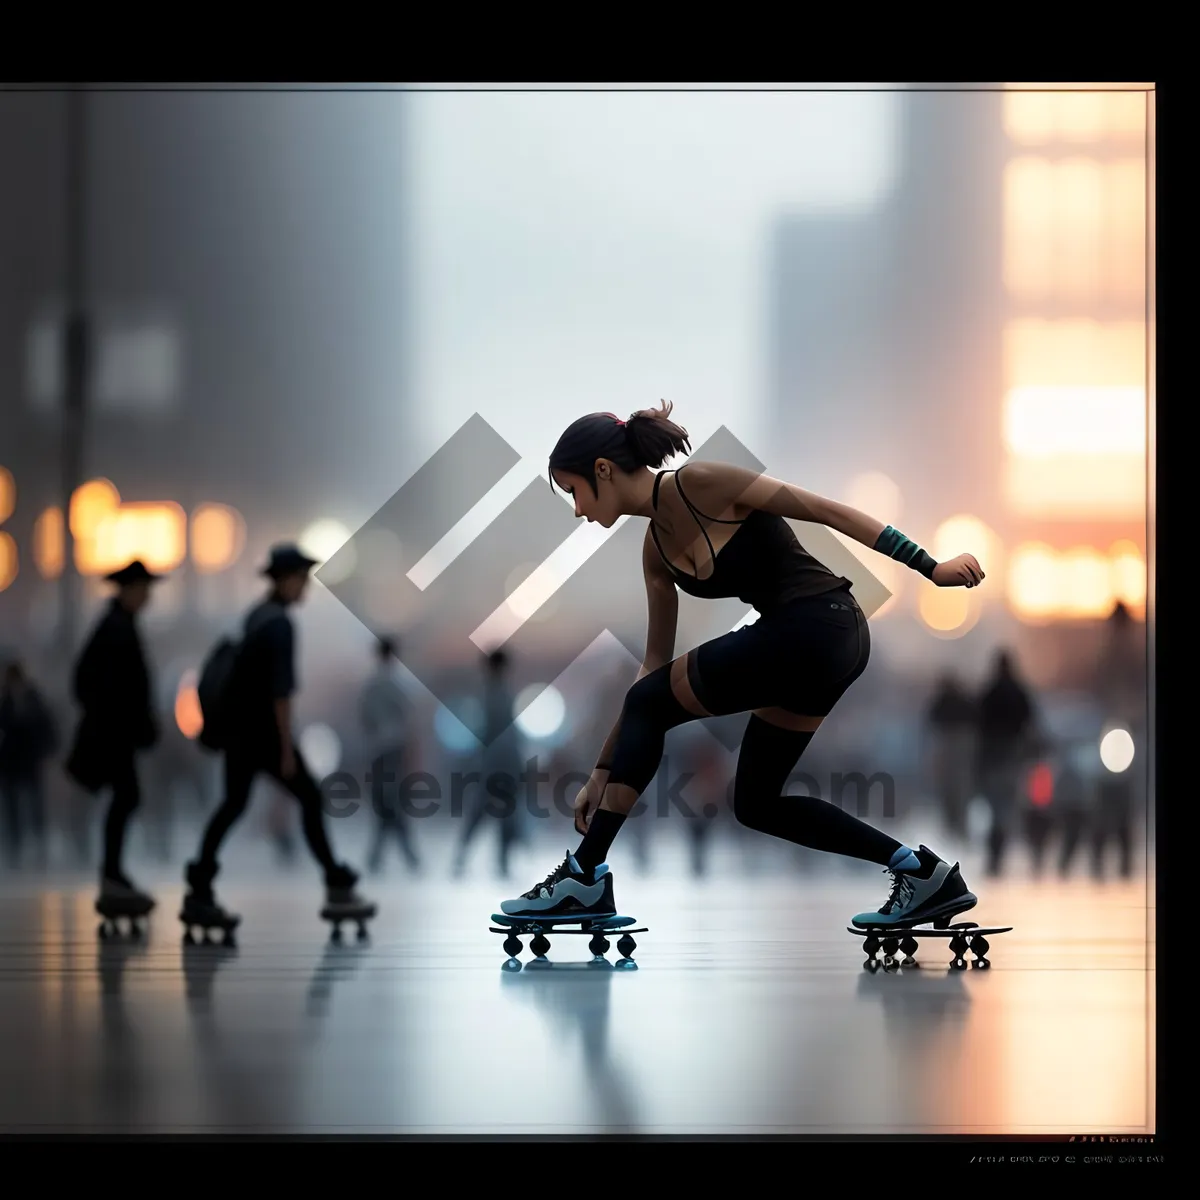 Picture of Skate Dance Silhouette at Sunset - Active Man Dancing